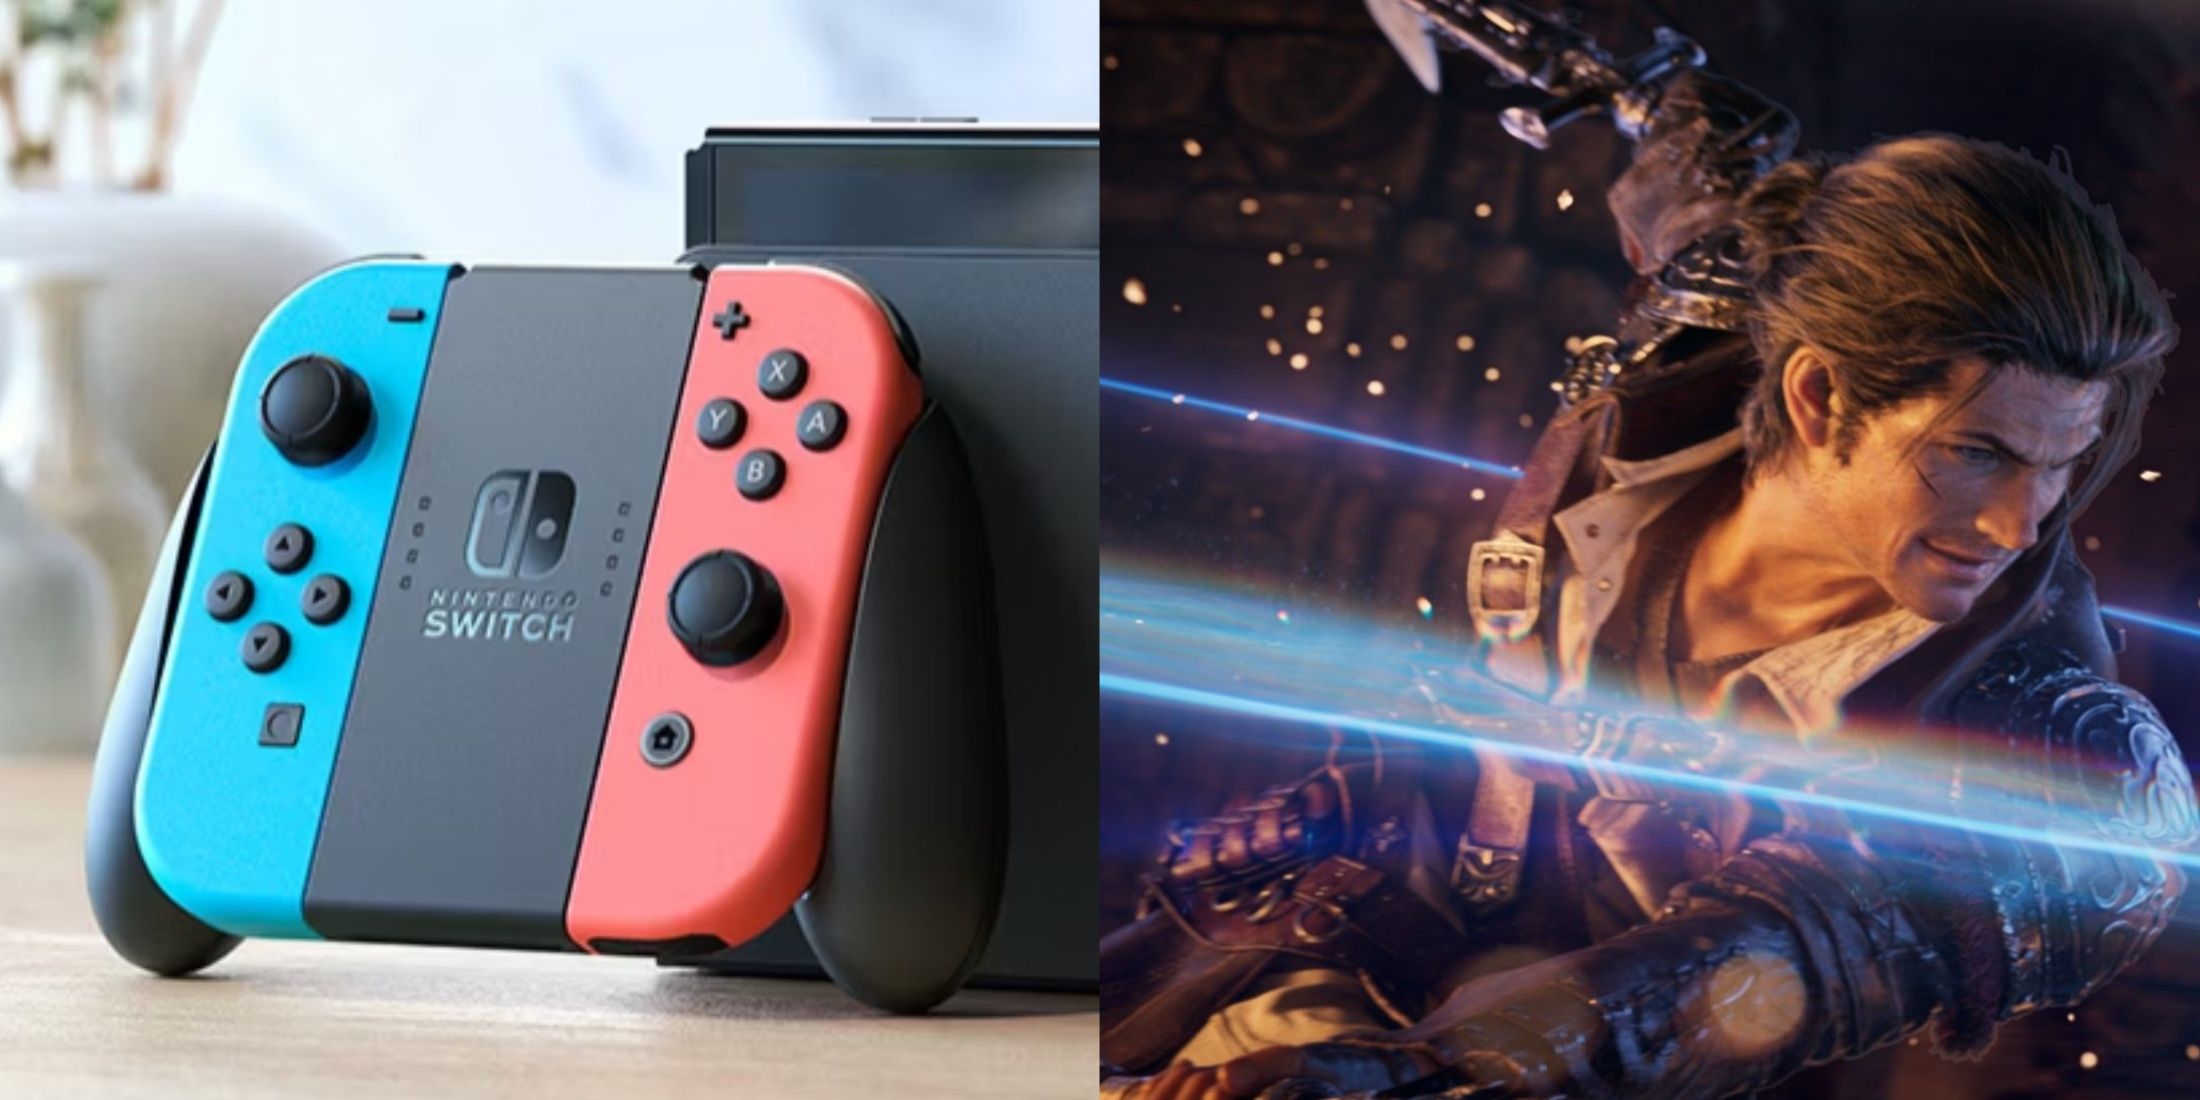 the Nintendo Switch pictured next to key art from Final Fantasy 14.